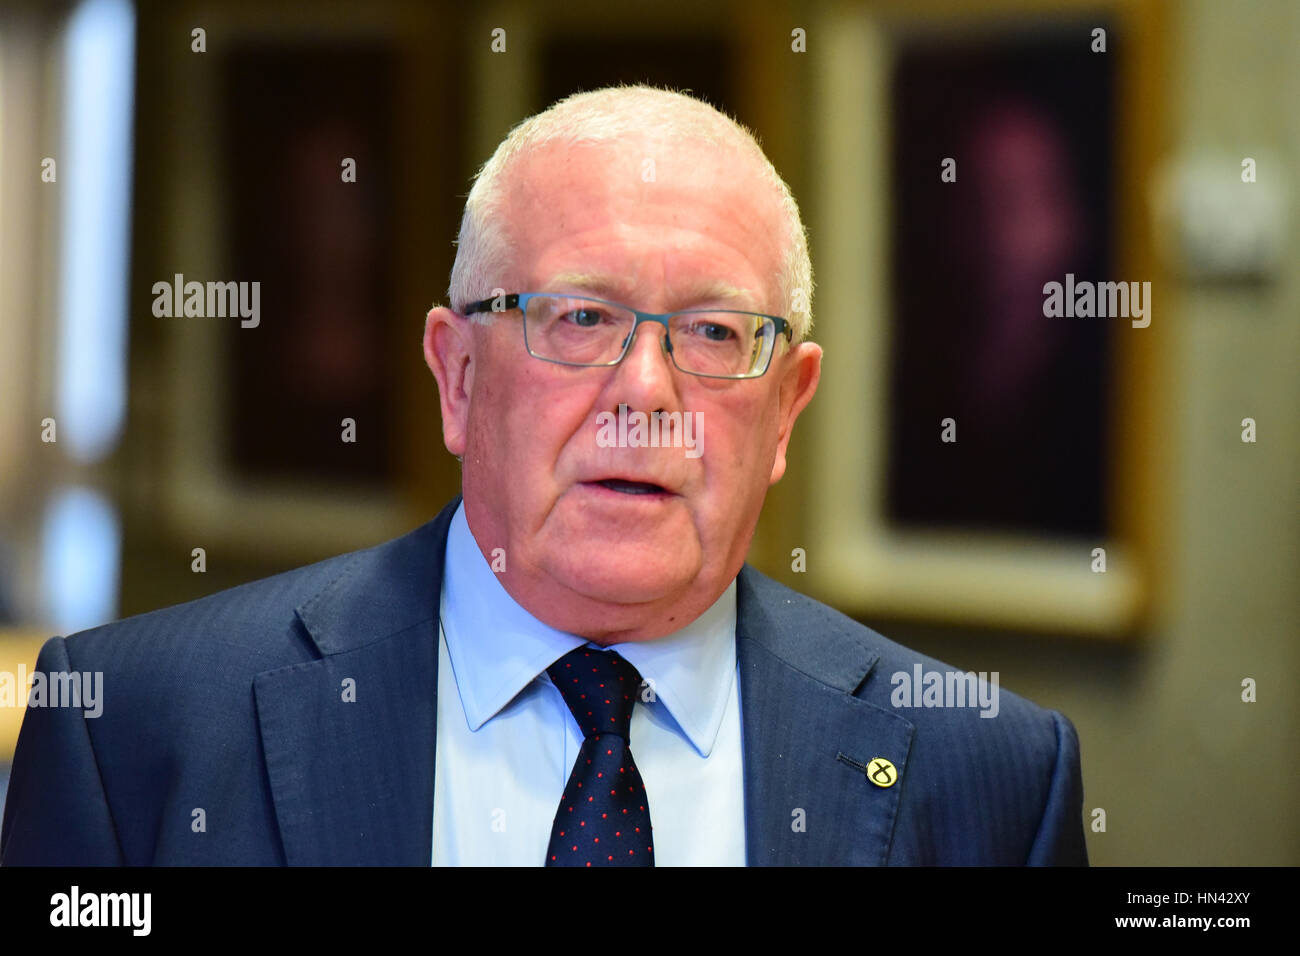 Edinburgh, UK. 8th Feb, 2017. Bruce Crawford MSP, Convener of the Finance and Constitution Committee of the Scottish Parliament, Credit: Ken Jack/Alamy Live News Stock Photo